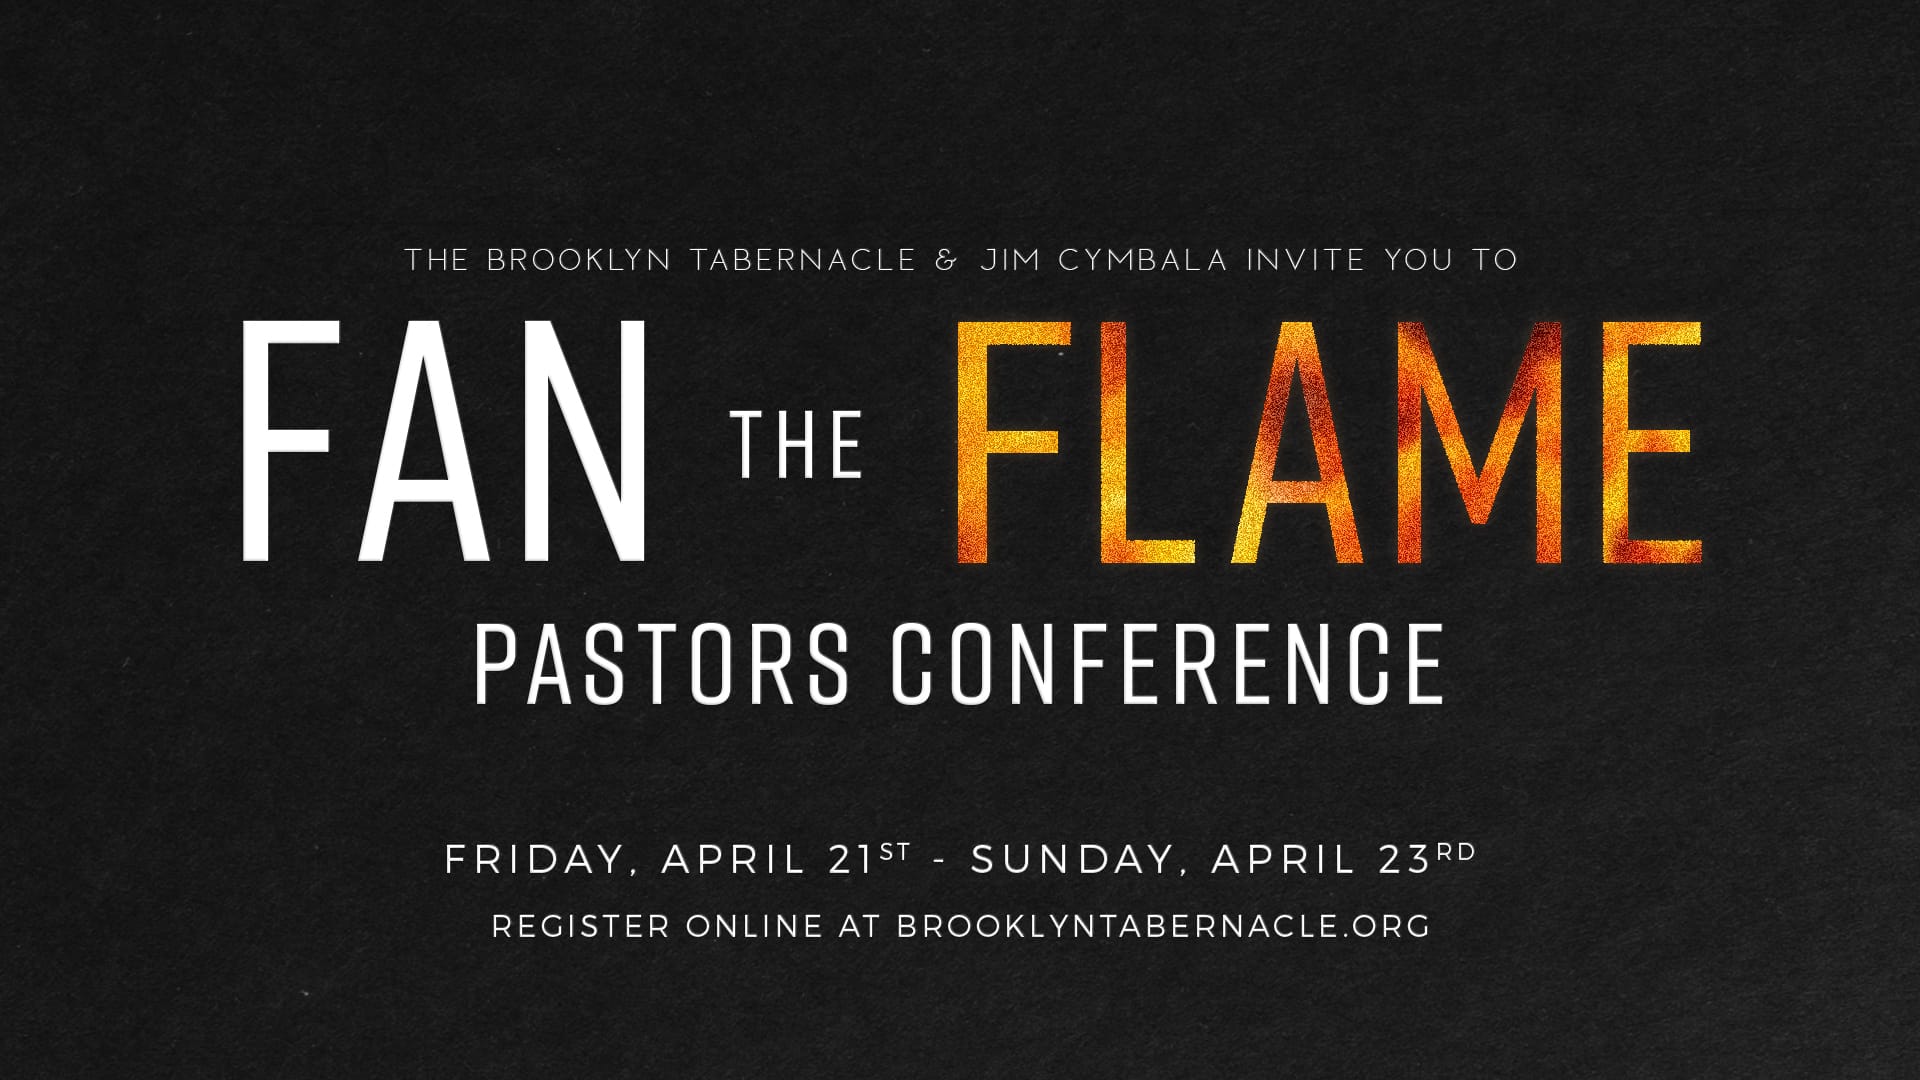 The Brooklyn Tabernacle And Jim Cymbala Fan The Flame Pastors Conference Registration Thumbnail